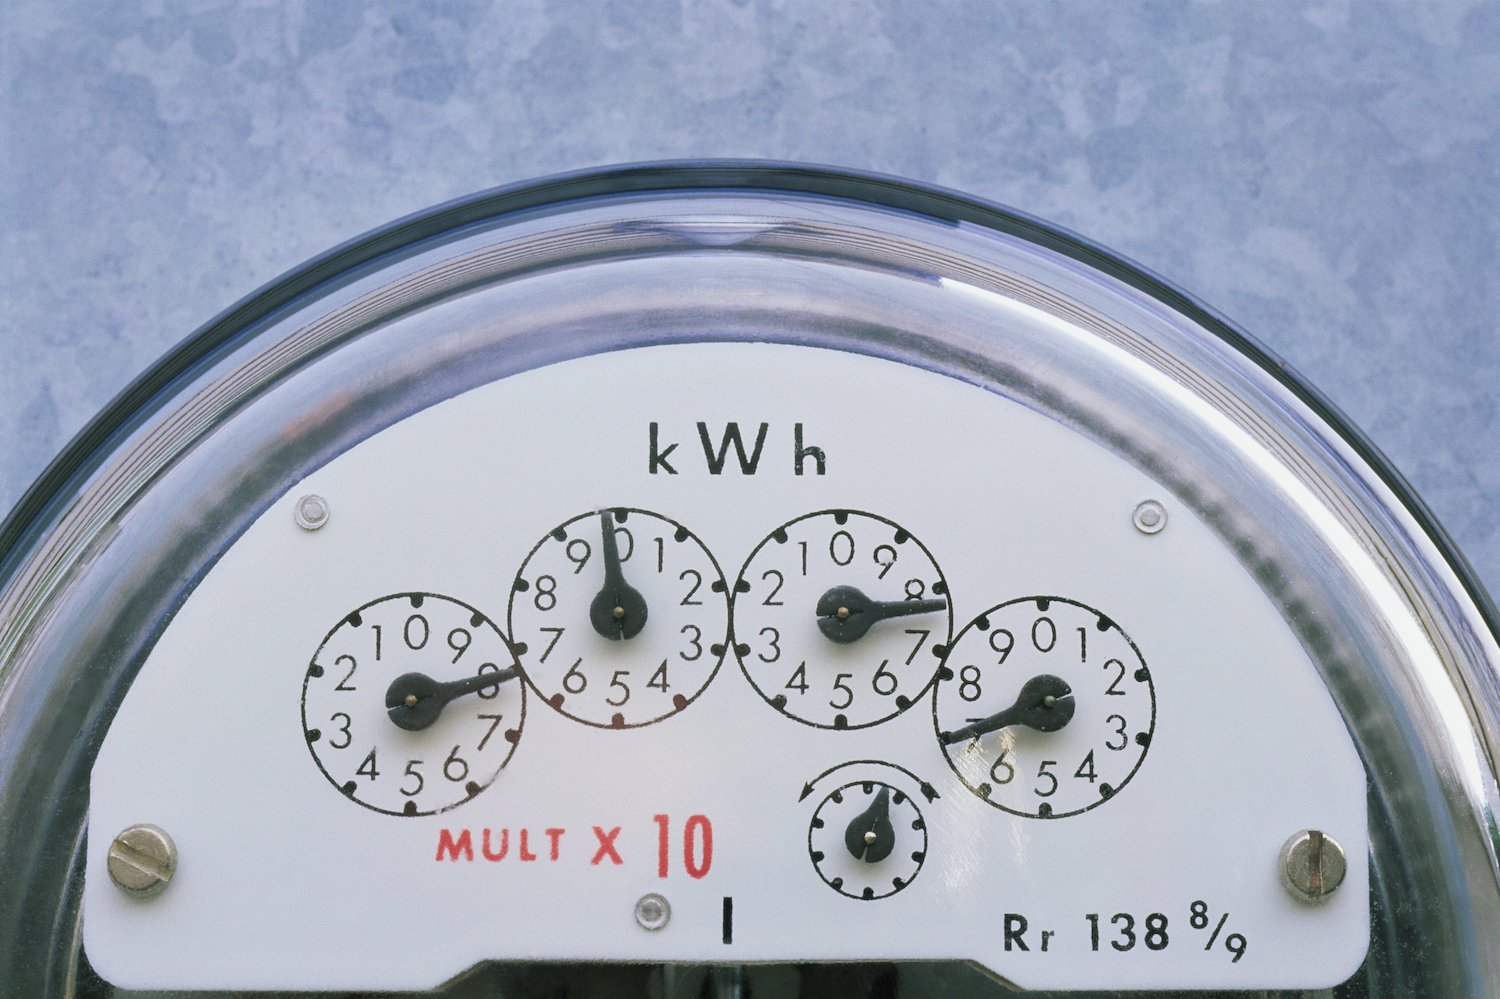 Hydroelectricity meter with dials tracking the customer's usage